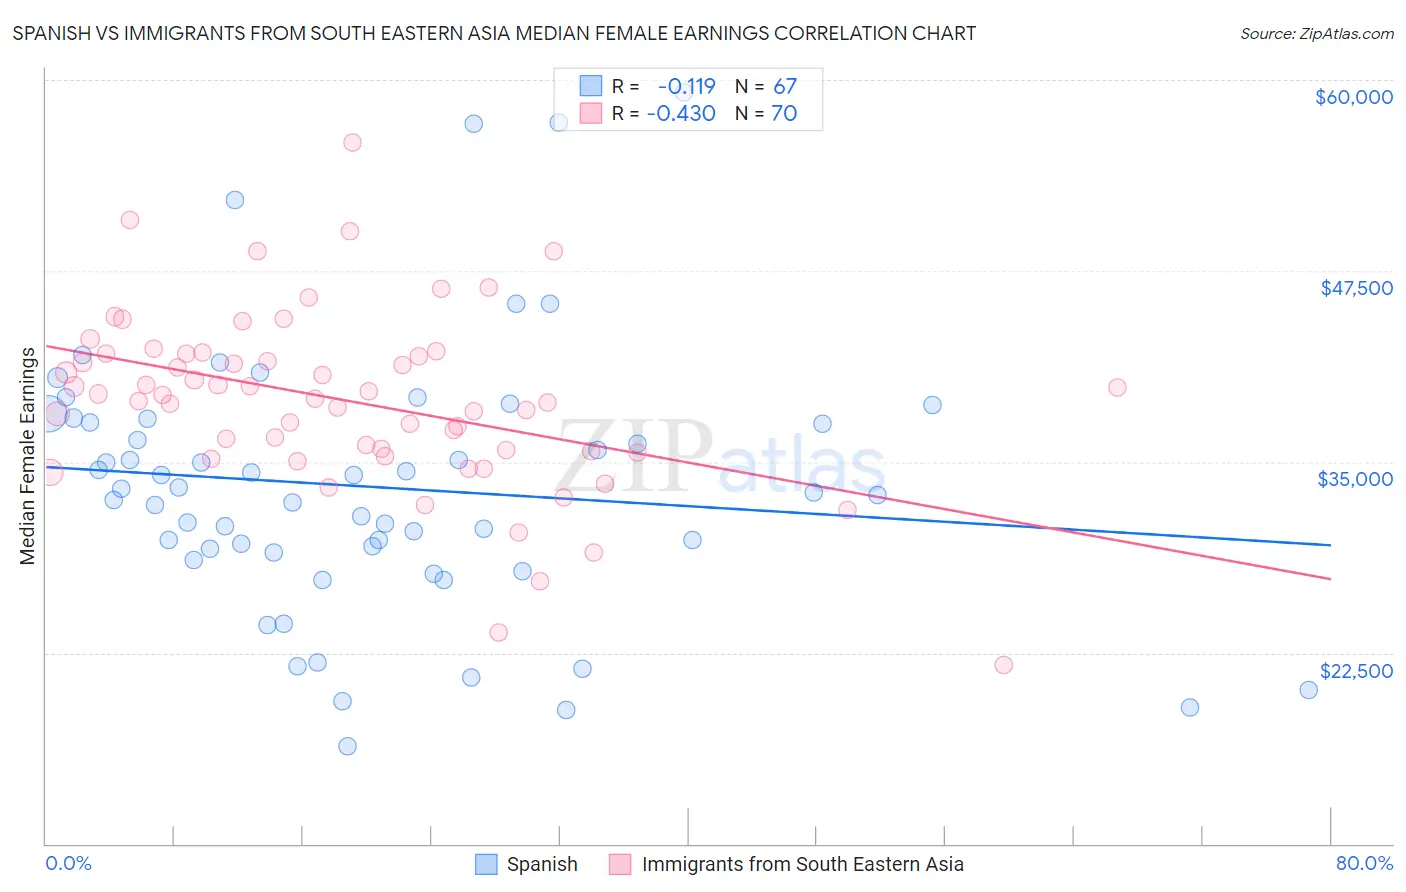 Spanish vs Immigrants from South Eastern Asia Median Female Earnings